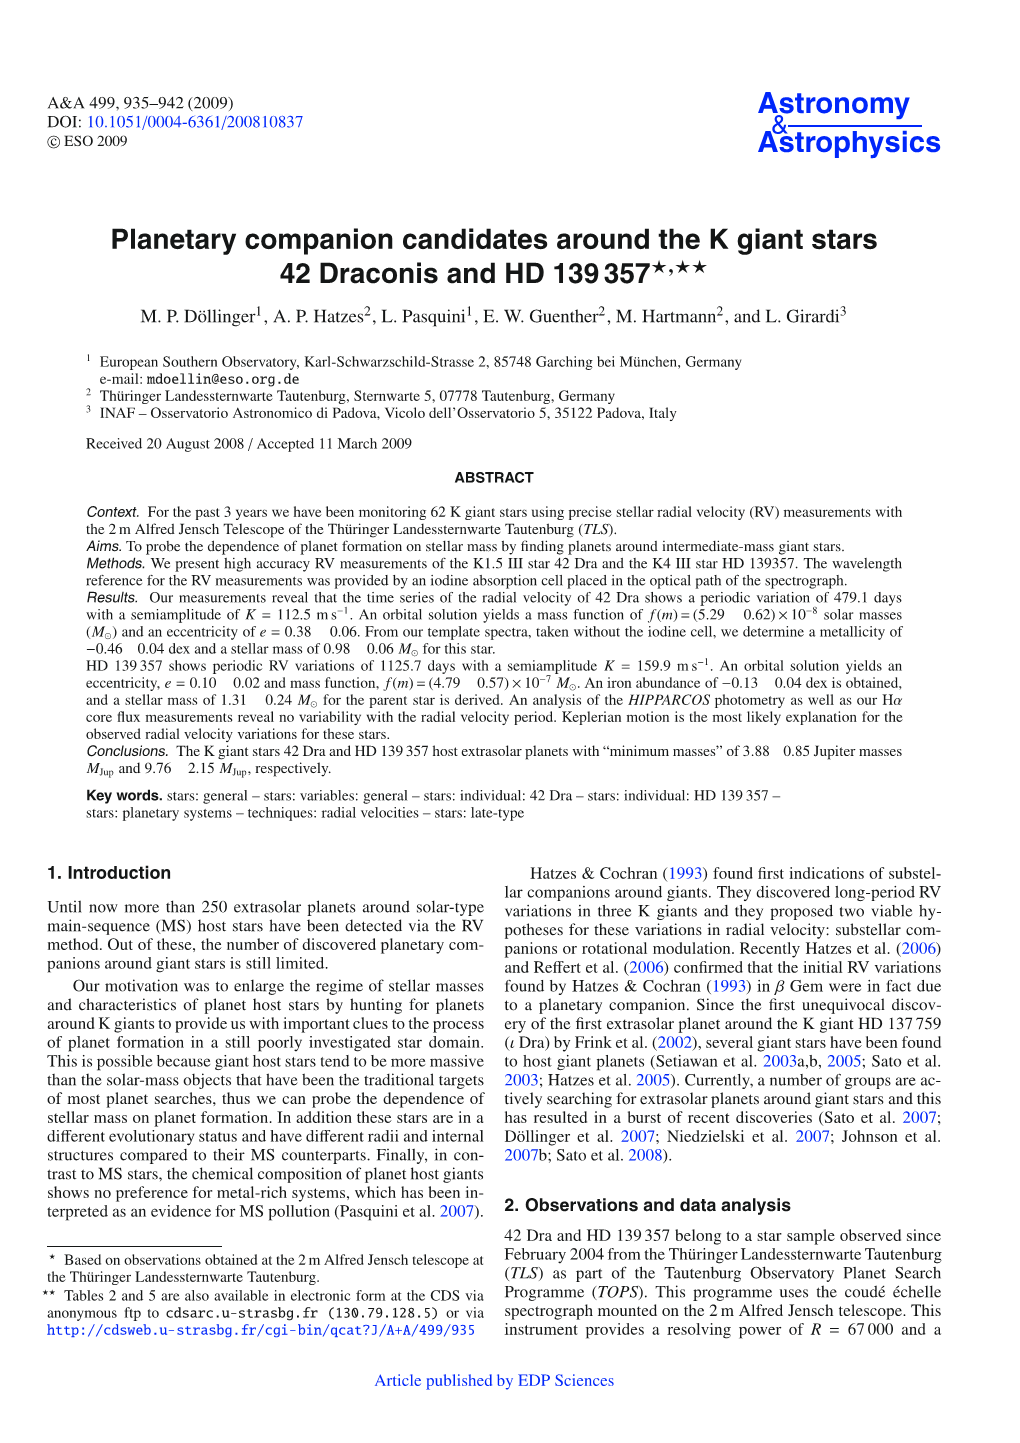 Planetary Companion Candidates Around the K Giant Stars 42 Draconis and HD 139 357�,